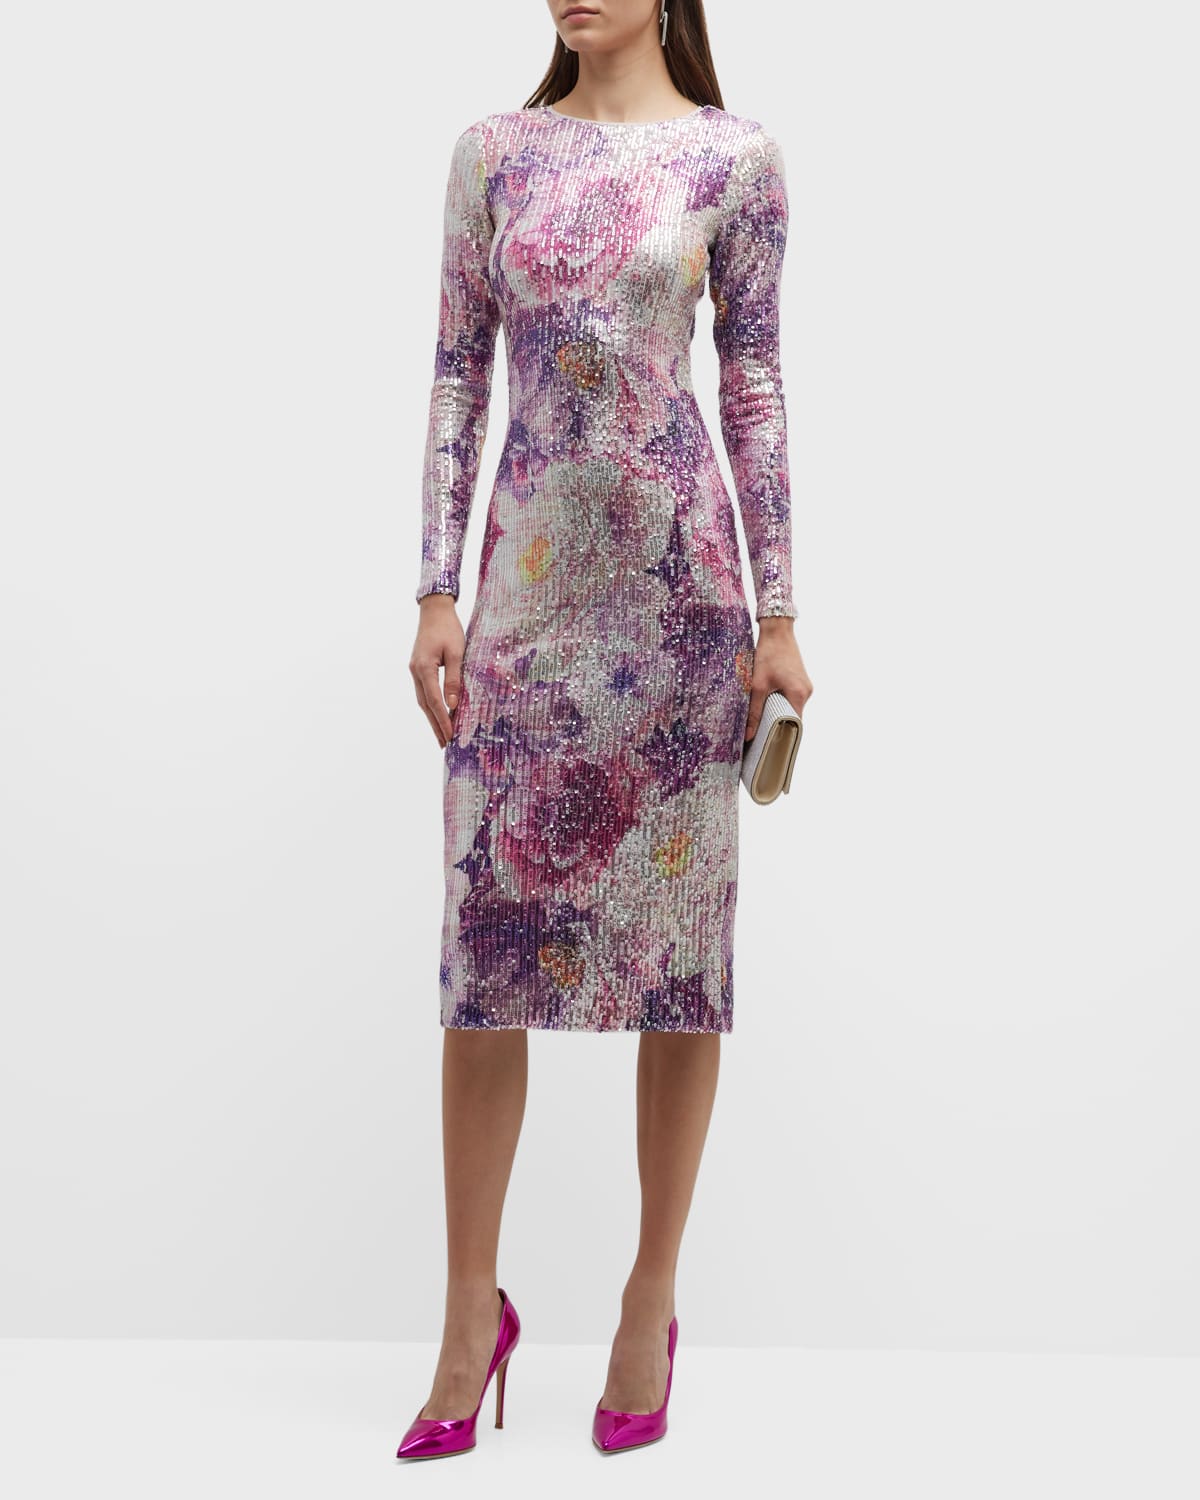 Kate Floral Sequined Midi Dress